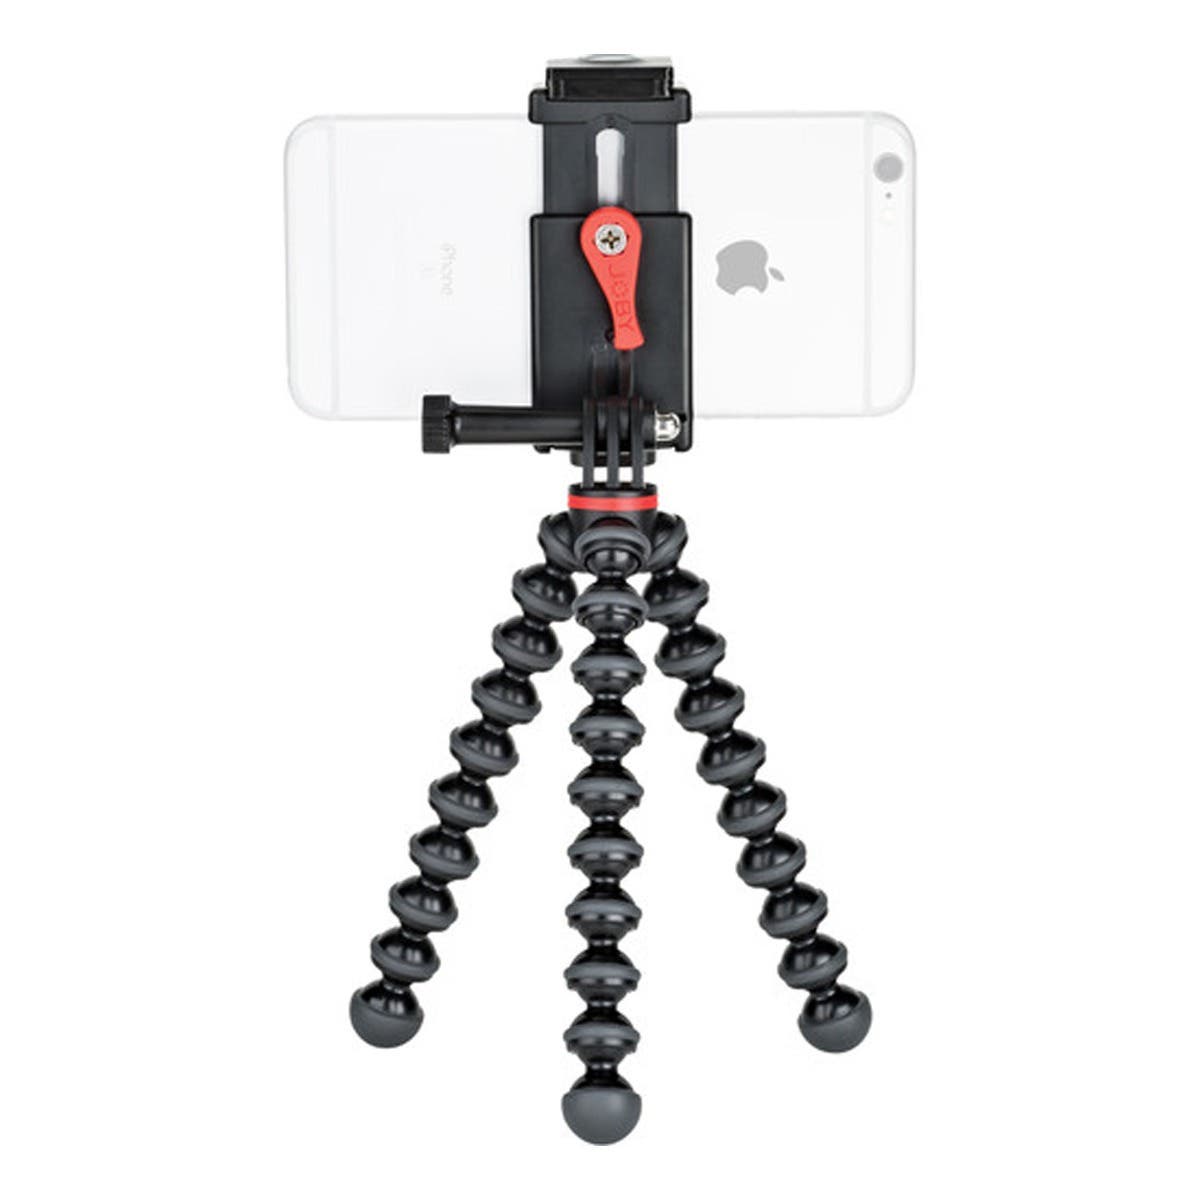 JOBY GripTight GorillaPod Action Stand with Mount for Smartphones Kit (JB01515-BWW)